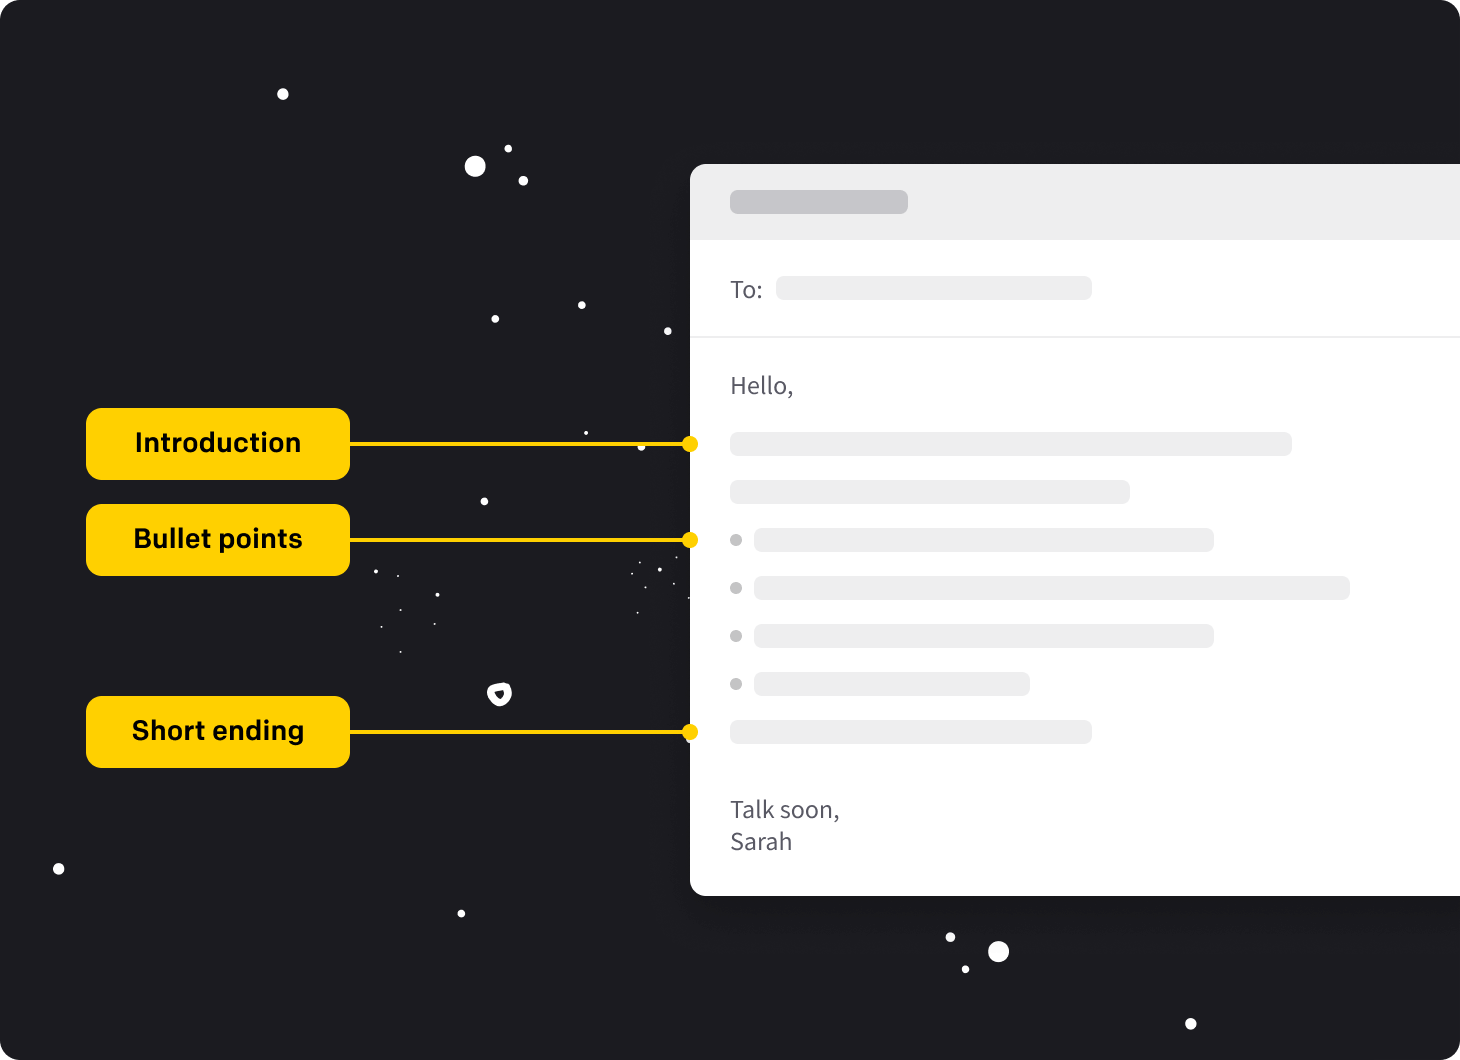 Email with introduction, bullet points, and short ending. Background with stars and the moon.